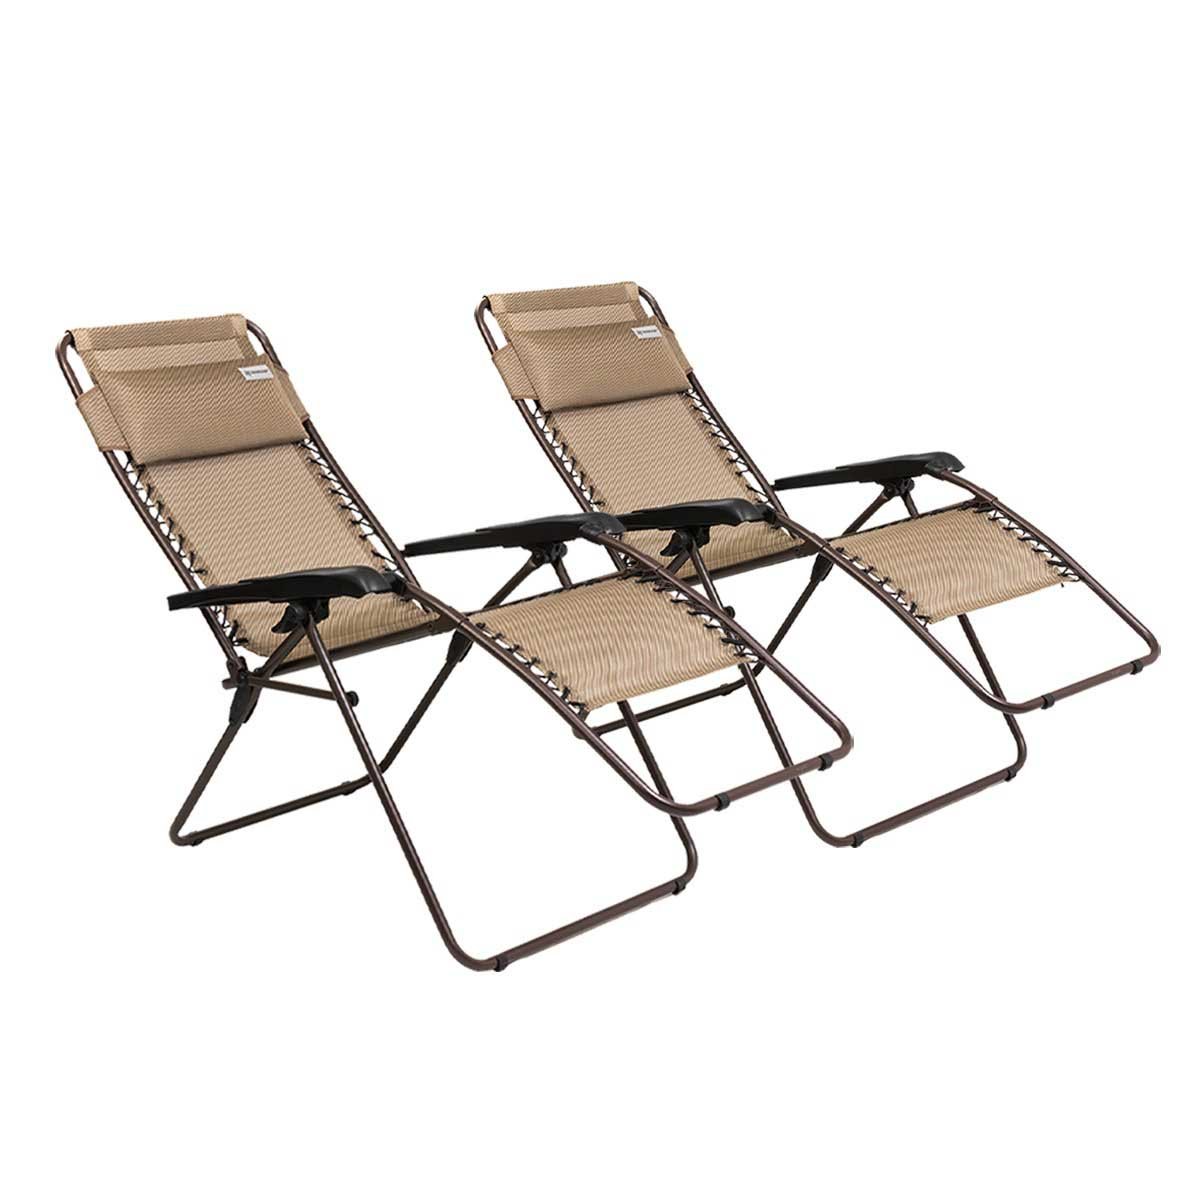 Zero Gravity Folding Patio Chair with Padded Pillow, Beige, Set of 2